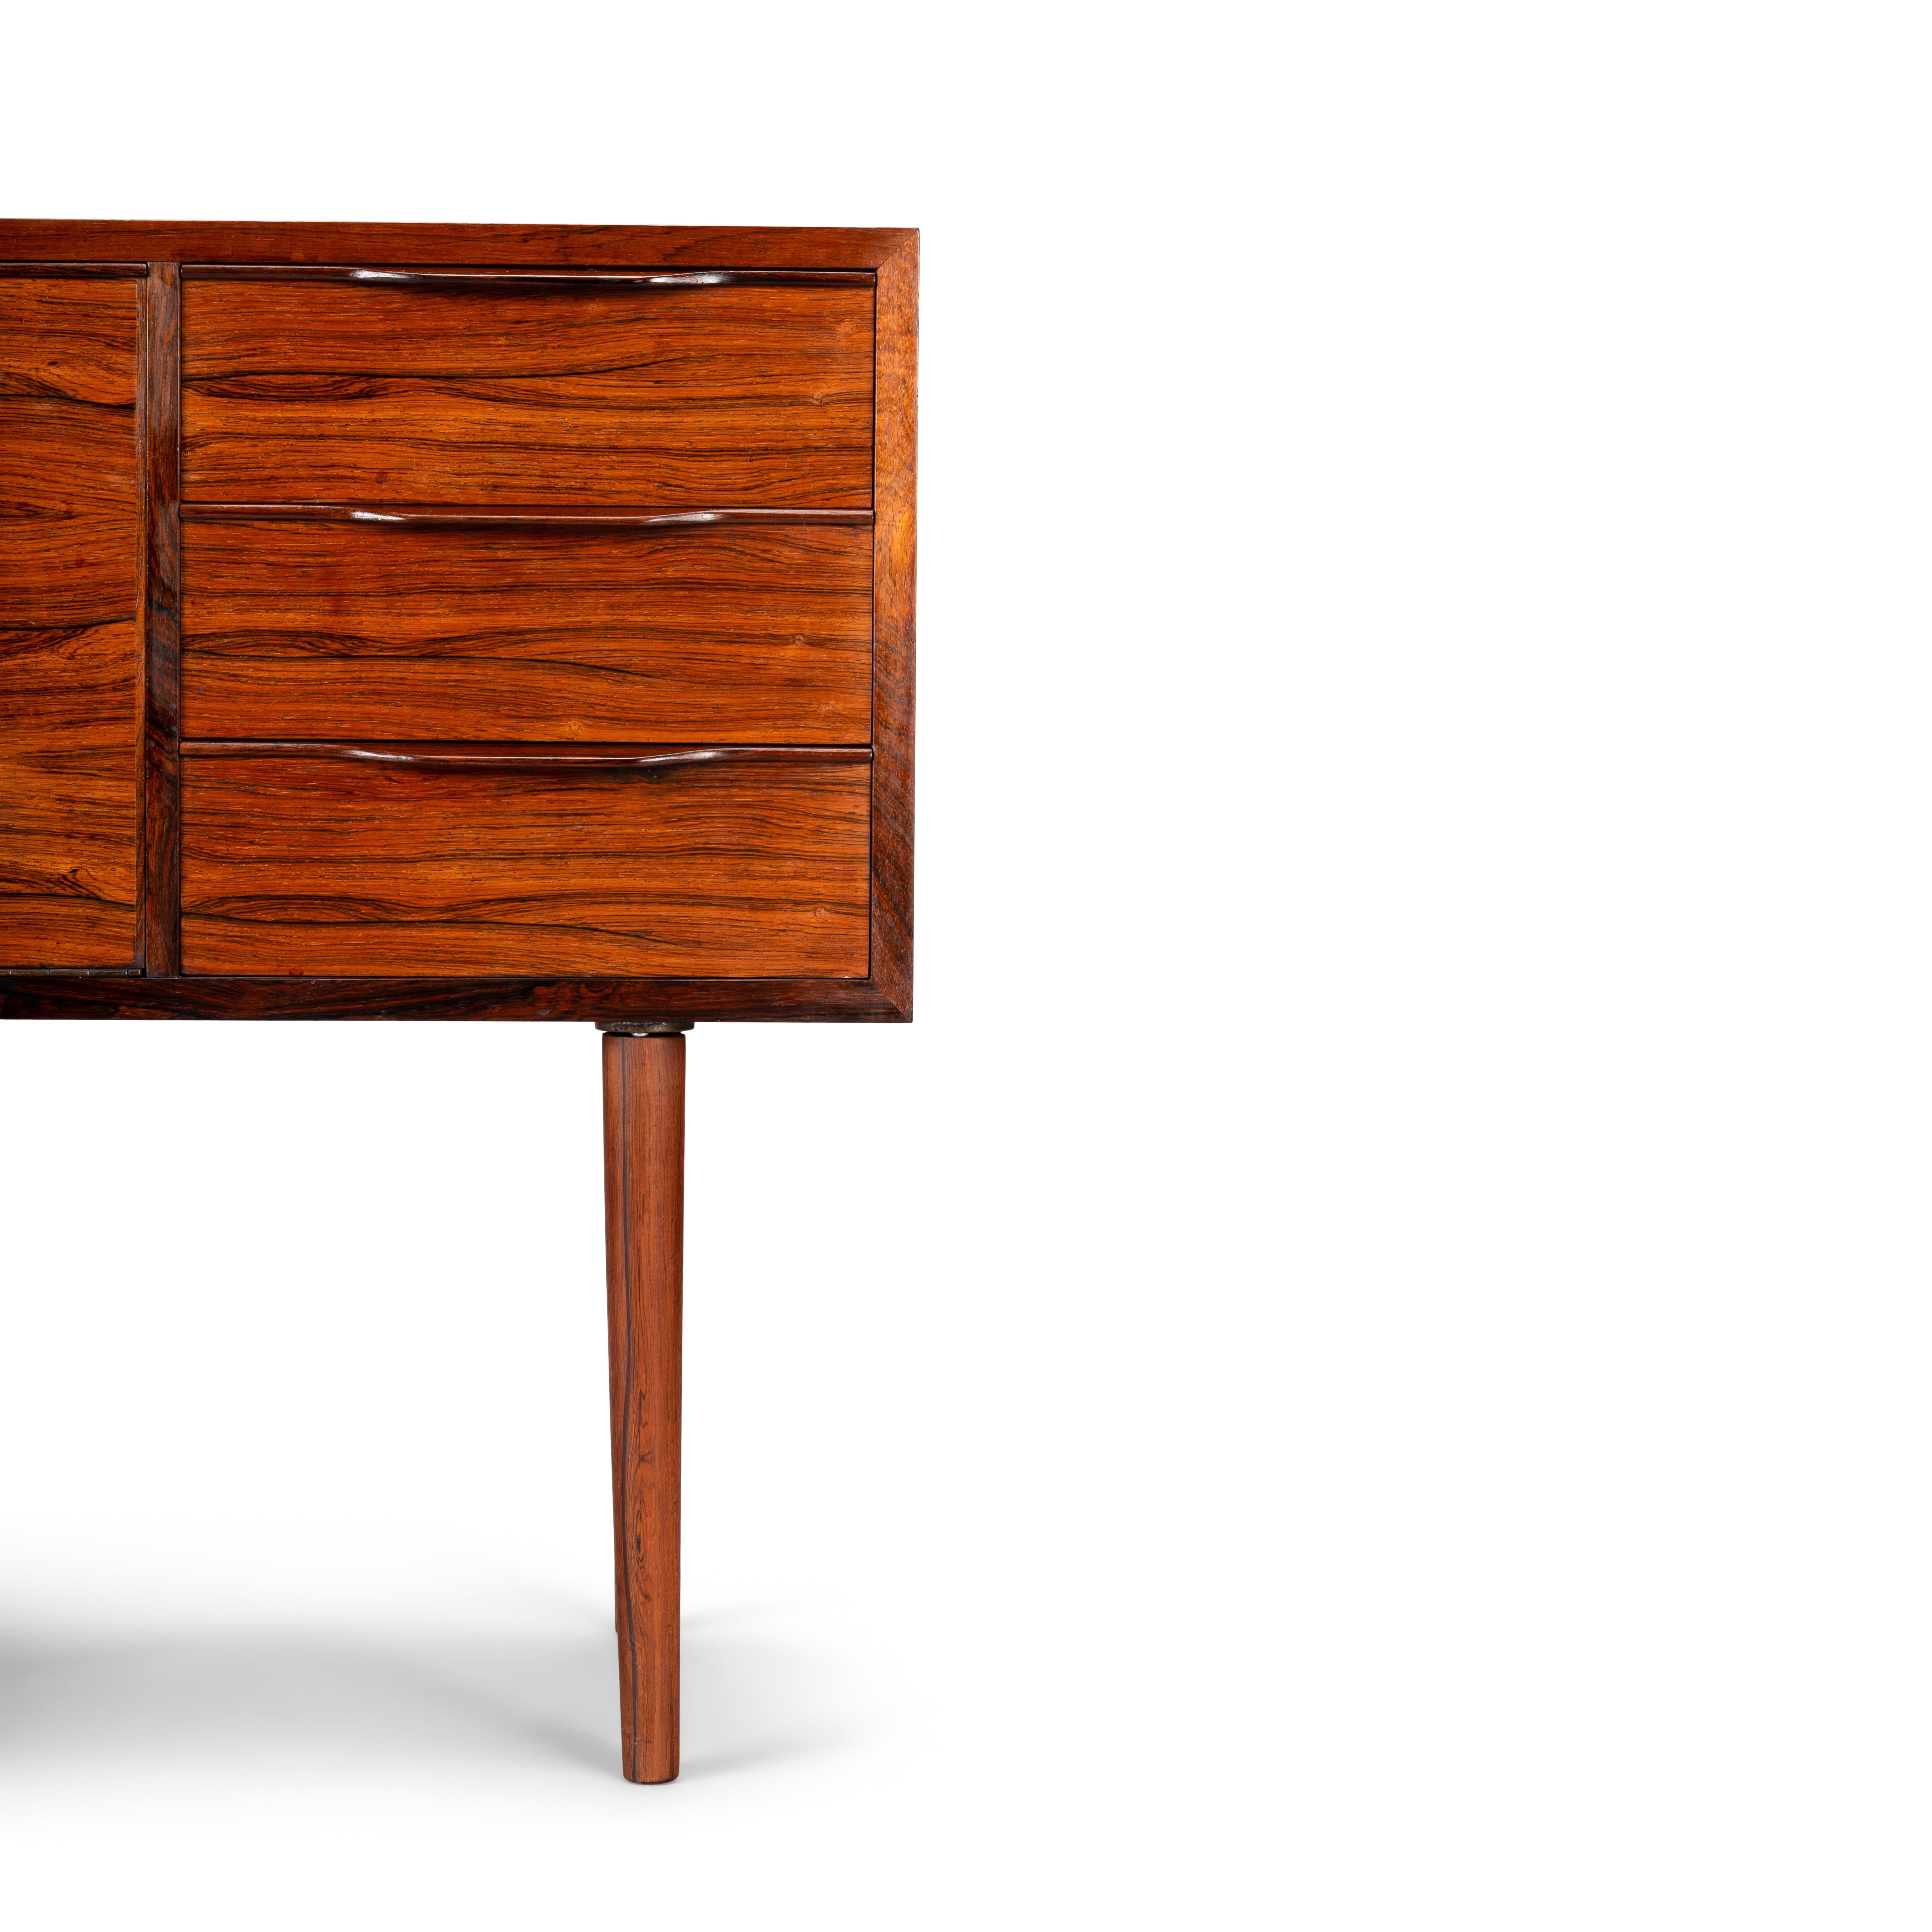 Hardwood Danish Mid-Century Modern Small Chest with Drawers, 1960s